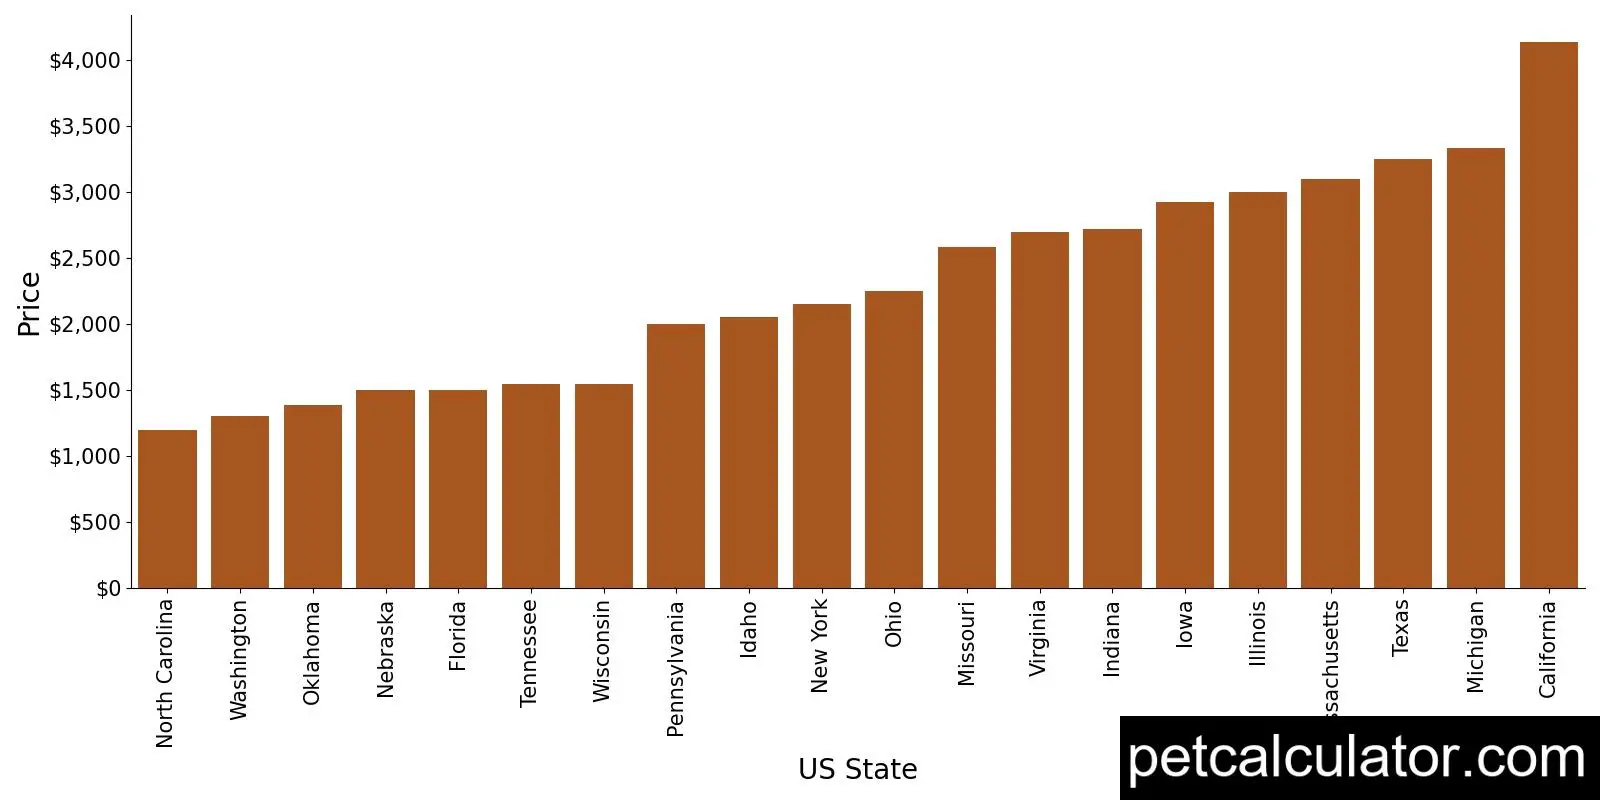 Price of Samoyed by US State 